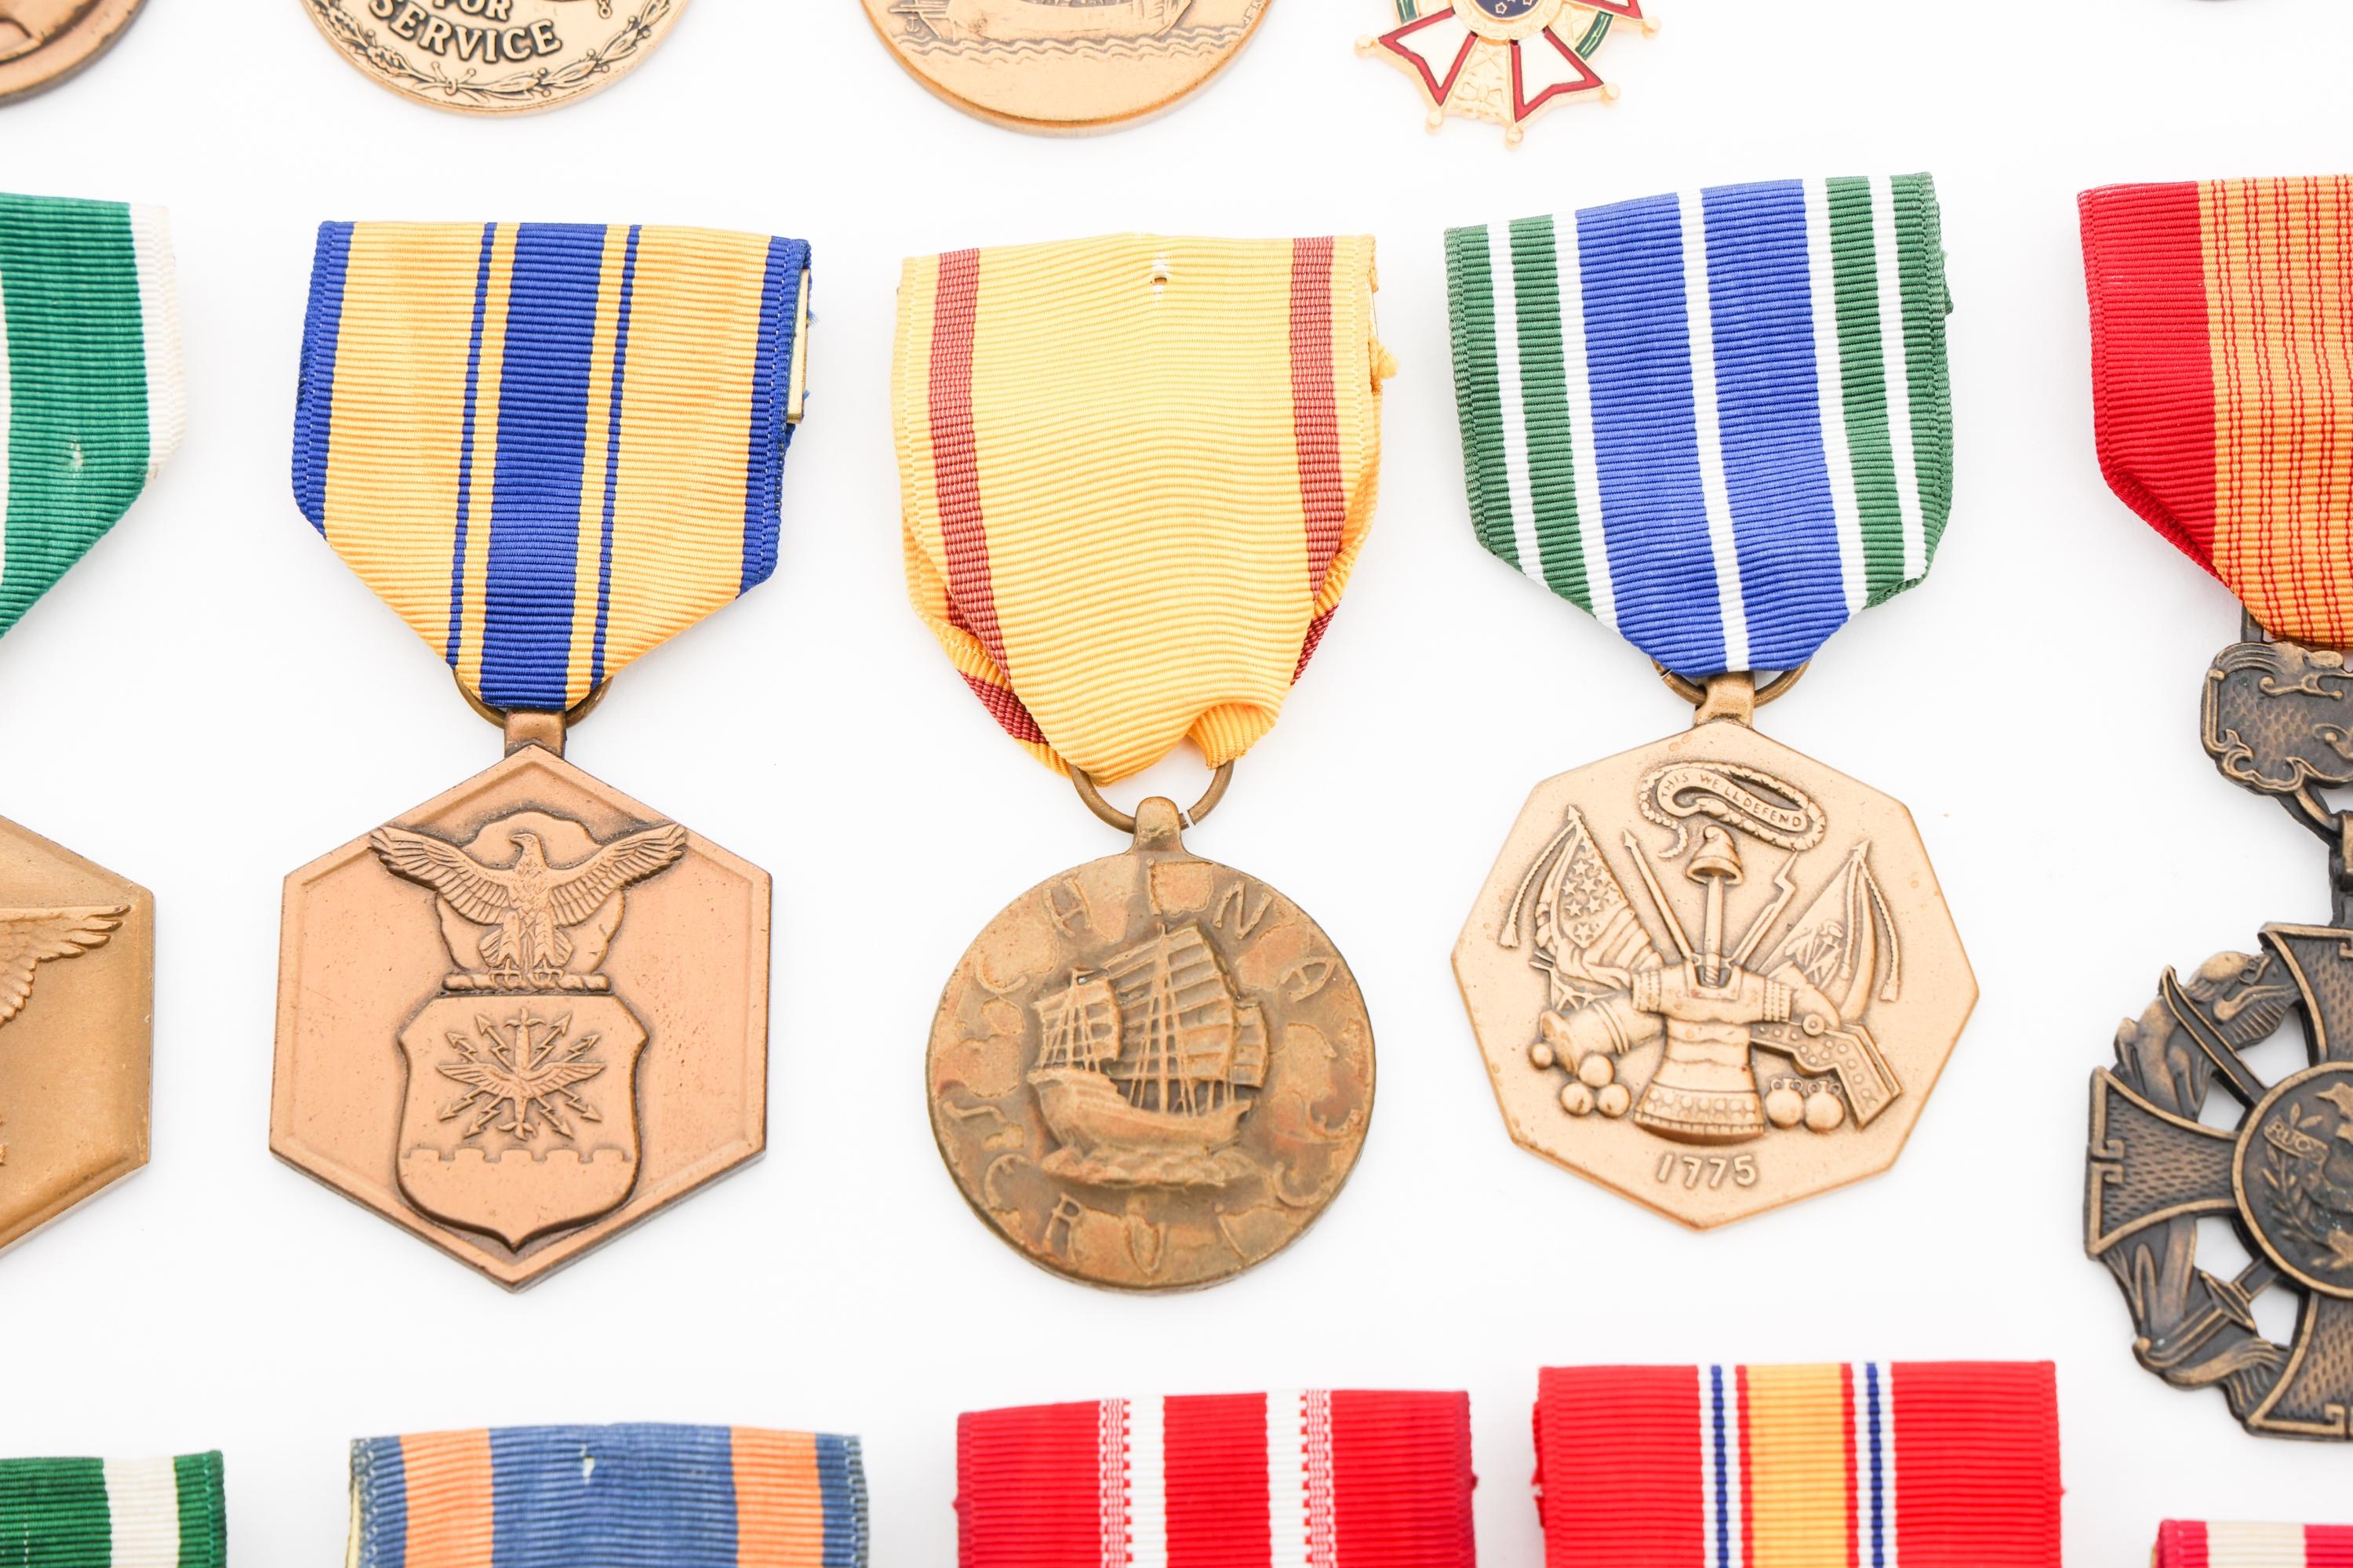 US MILITARY MEDALS & COMMEMORATIVE SERVICE MEDALS